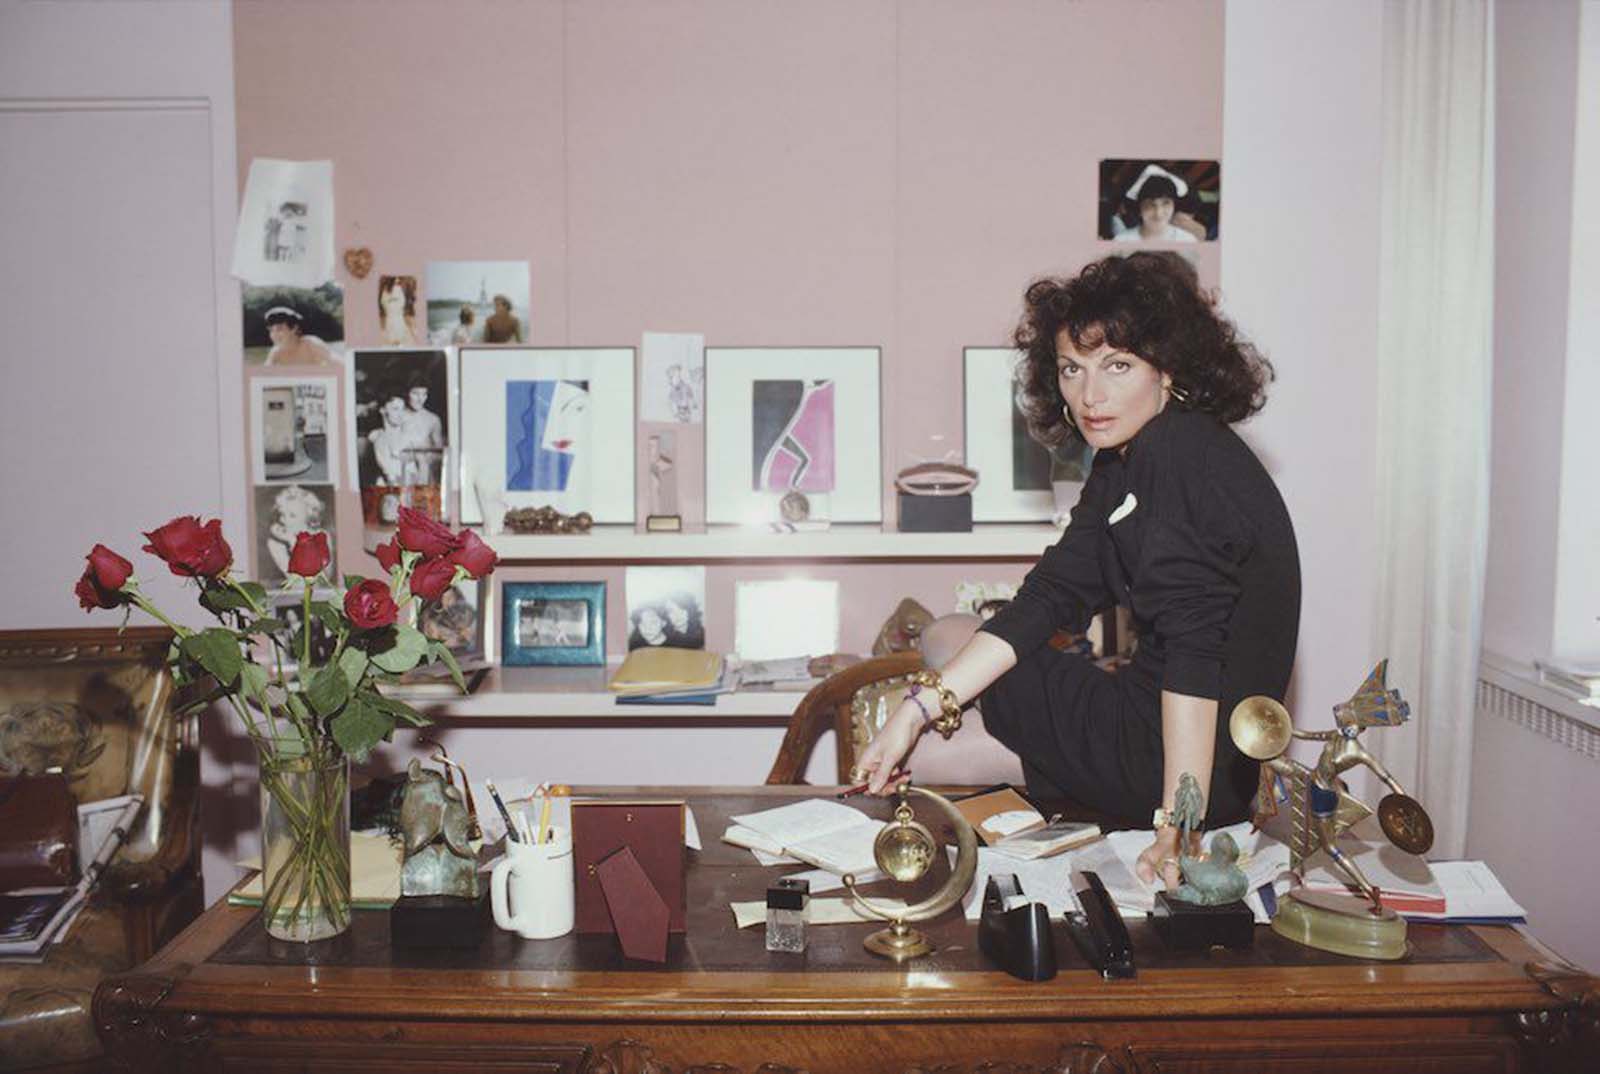 Belgian-born American fashion designer Diane Von Furstenberg in her studio. Furstenberg has very strong makeup, including gloss lipstick. She wears large hoop earrings and oversized bracelets and rings. She dresses in black, accented with a white pocket handkerchief on her chest. 1987.